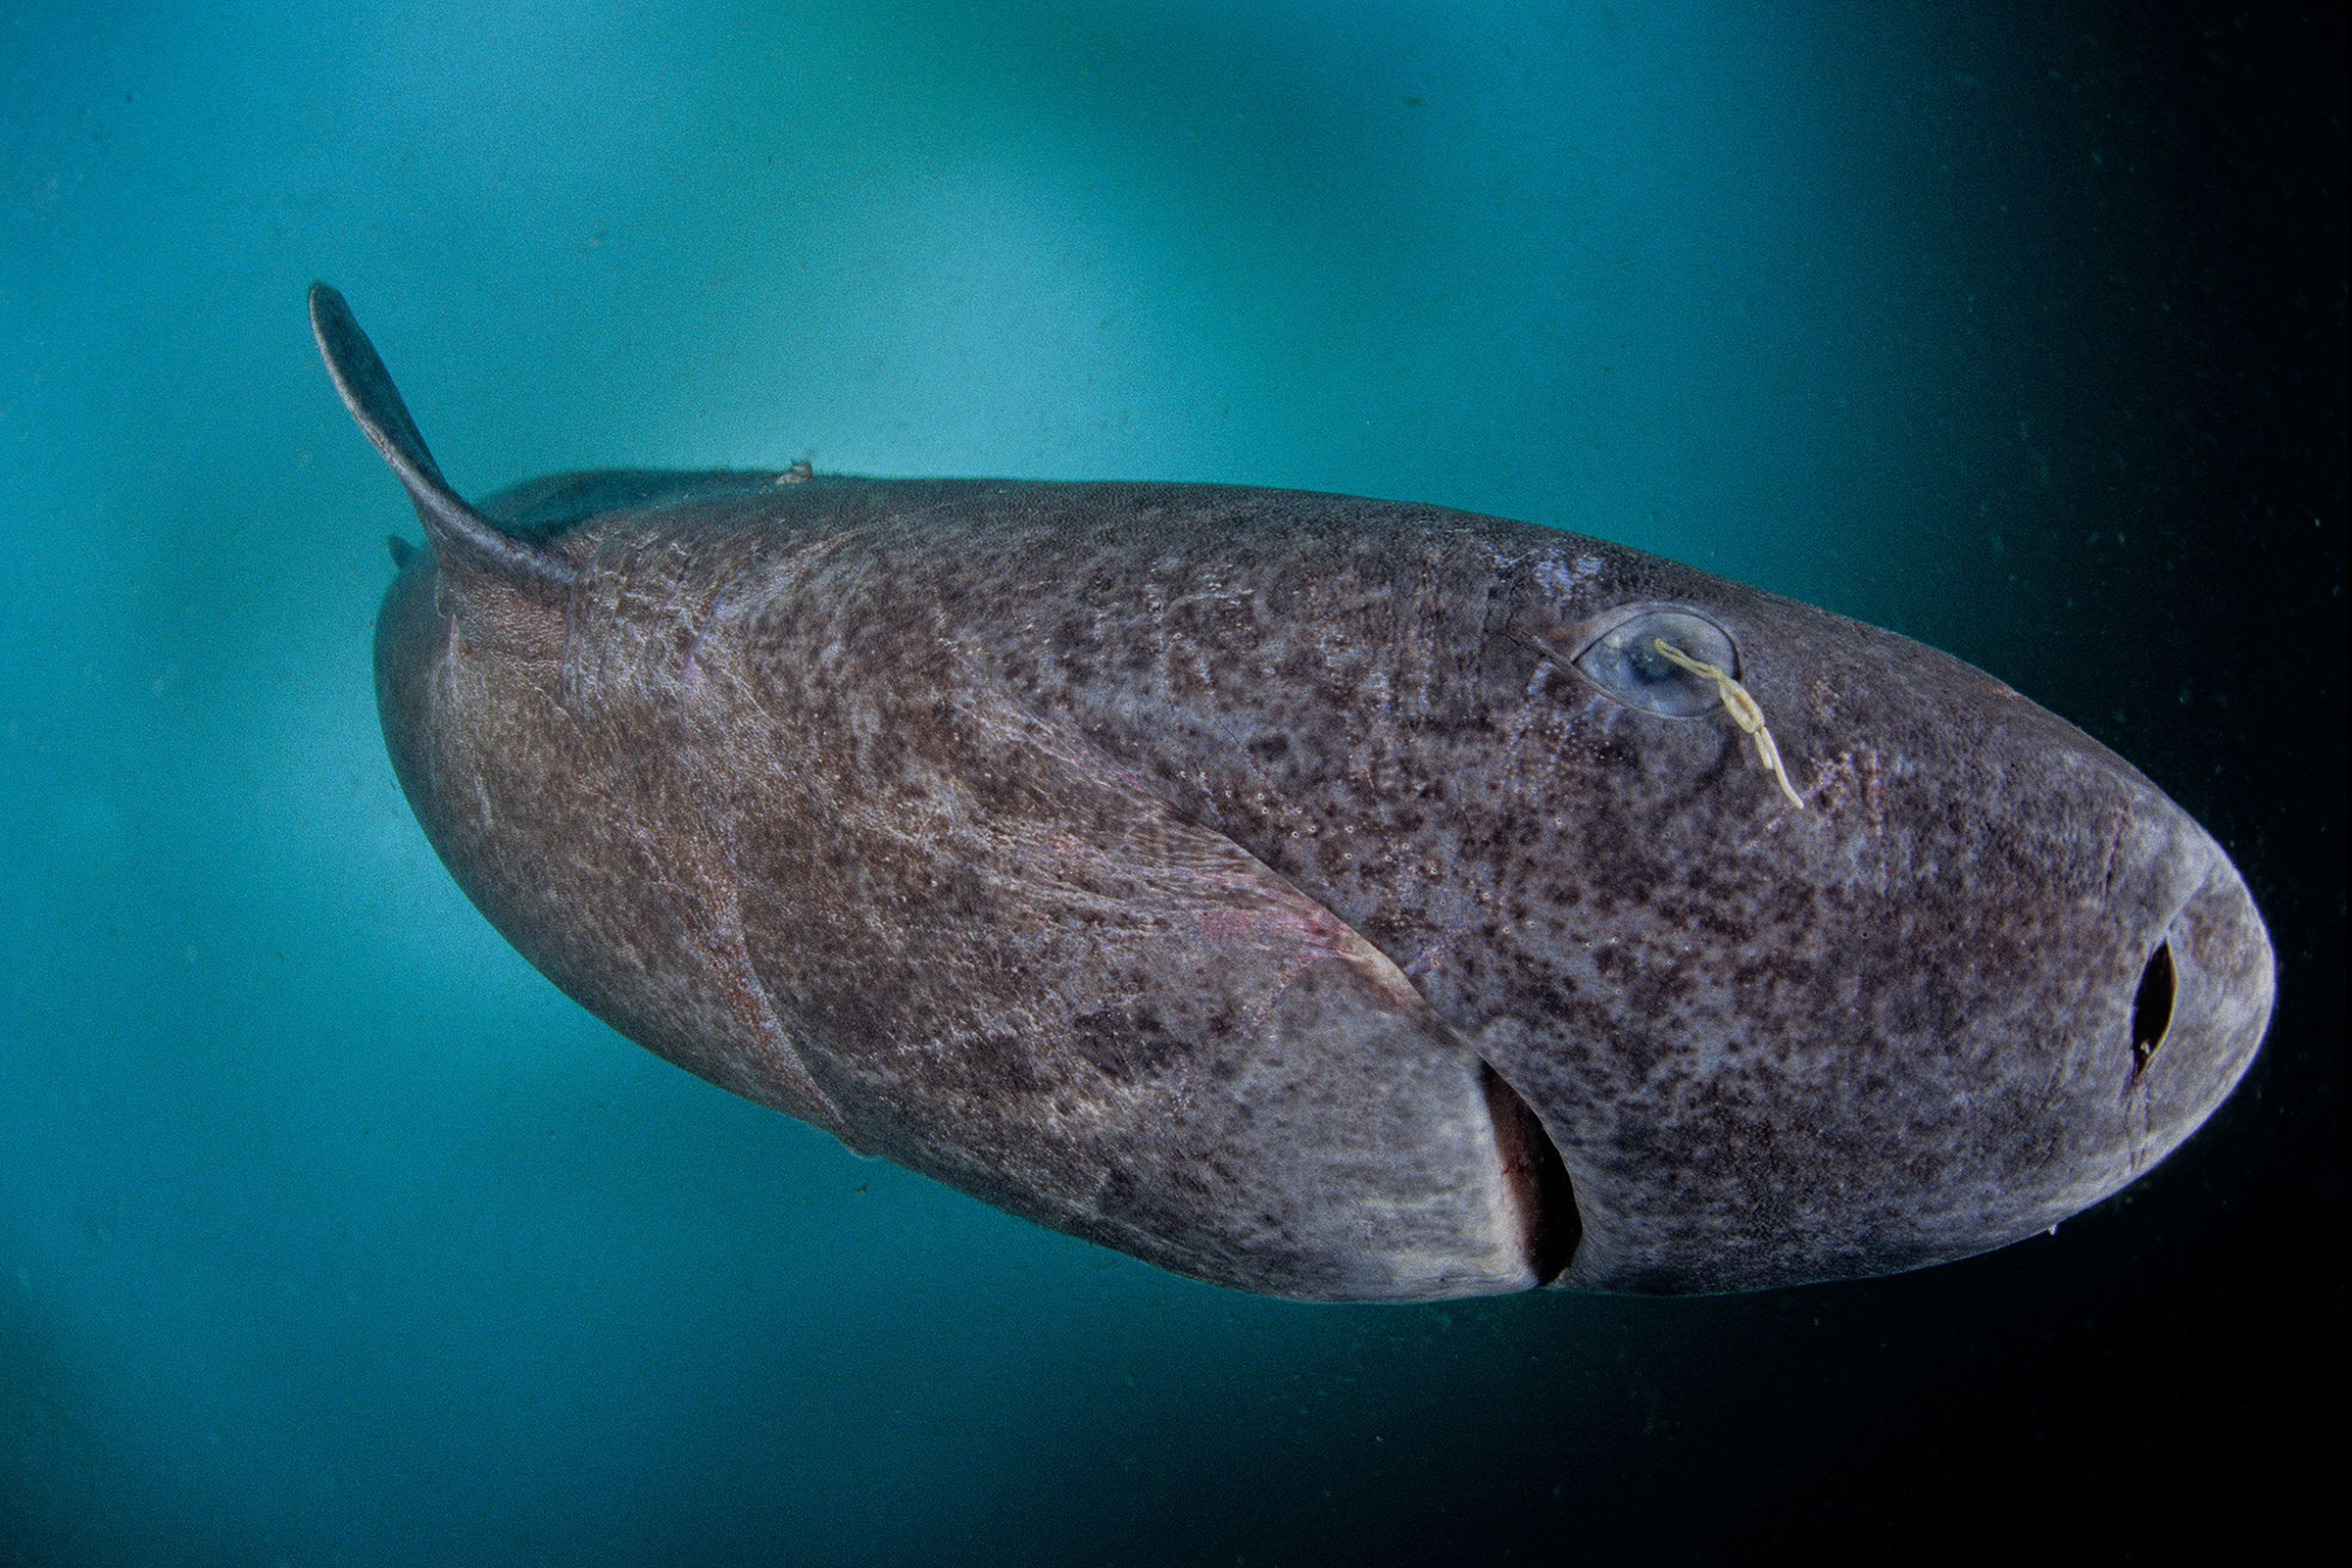 A Greenland shark with a crustacean parasite in its eye.